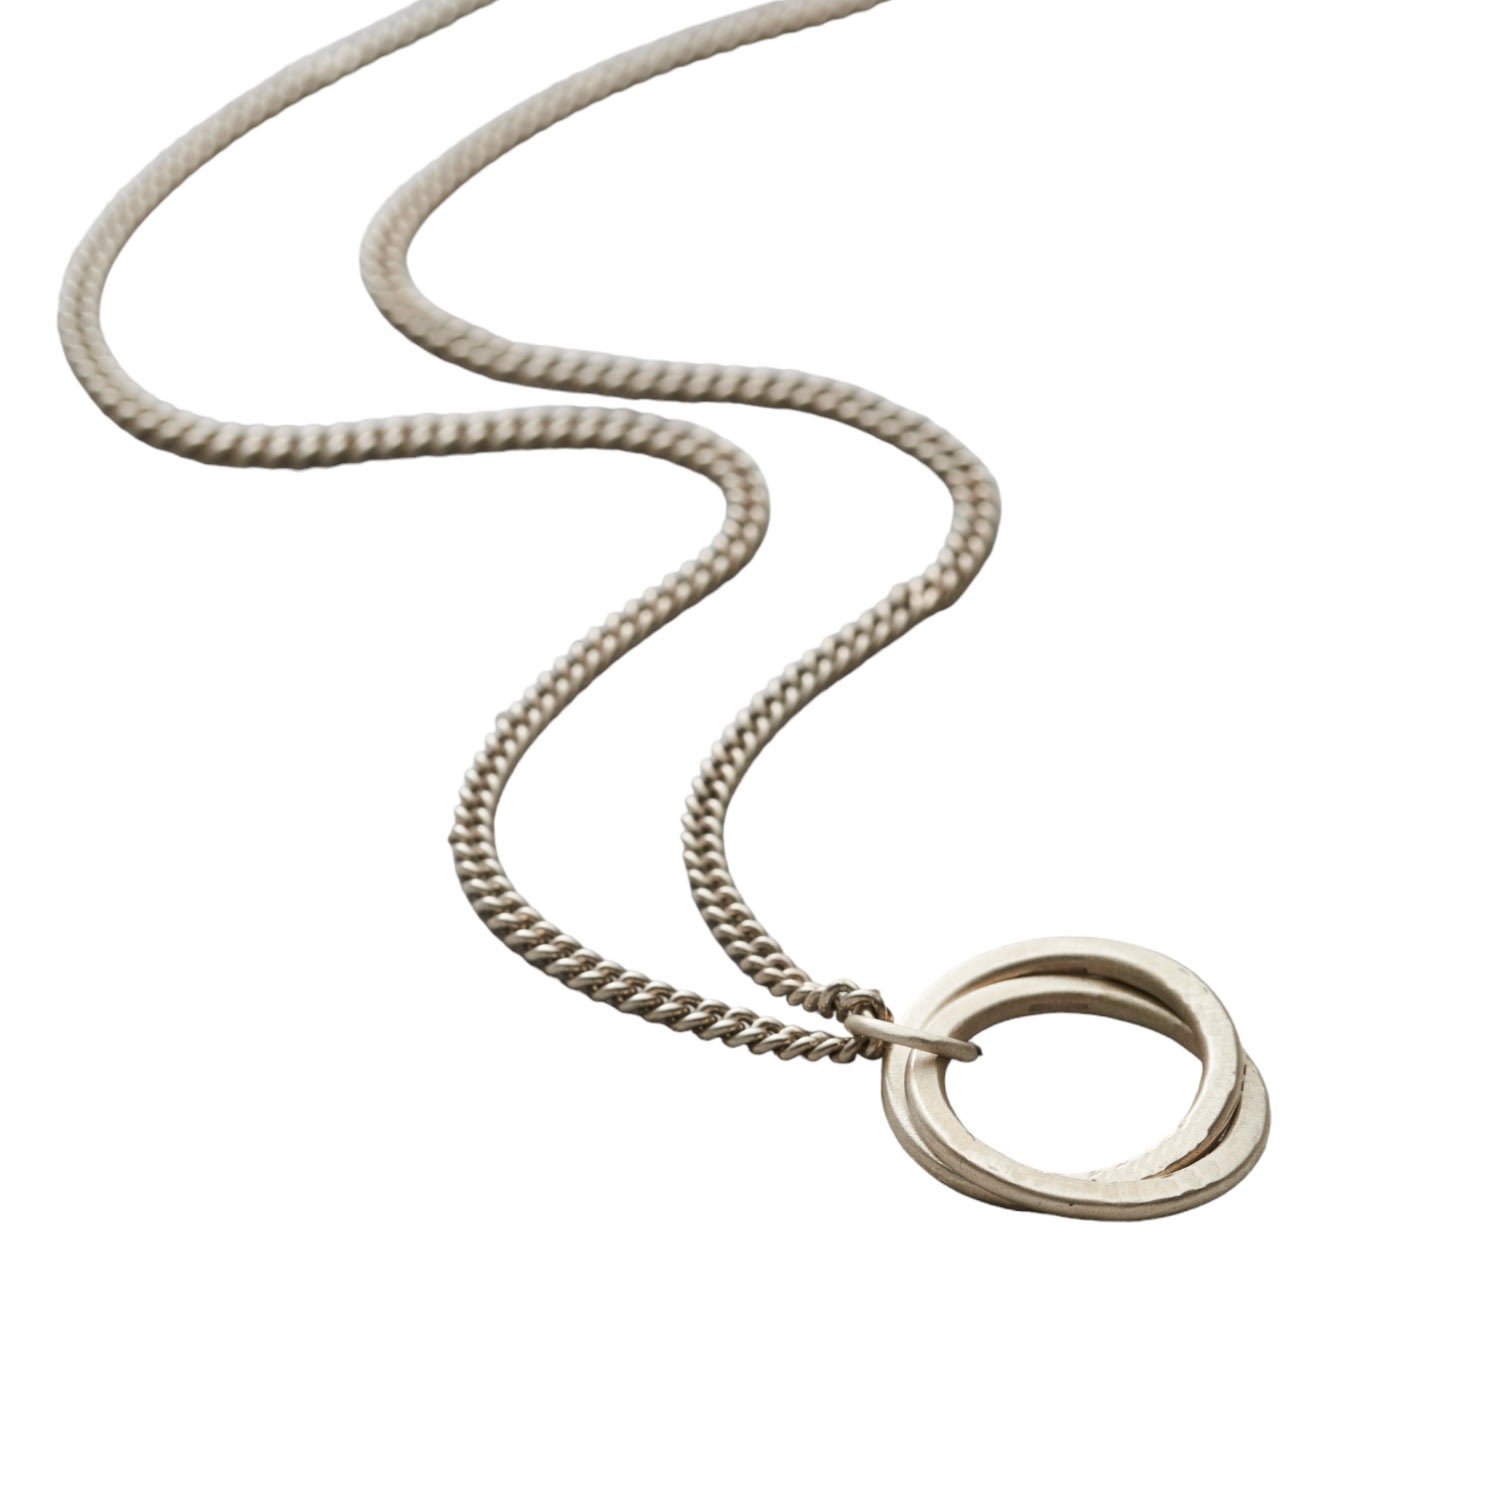 Men's Sterling Silver Interlinking Ring Necklace Posh Totty Designs